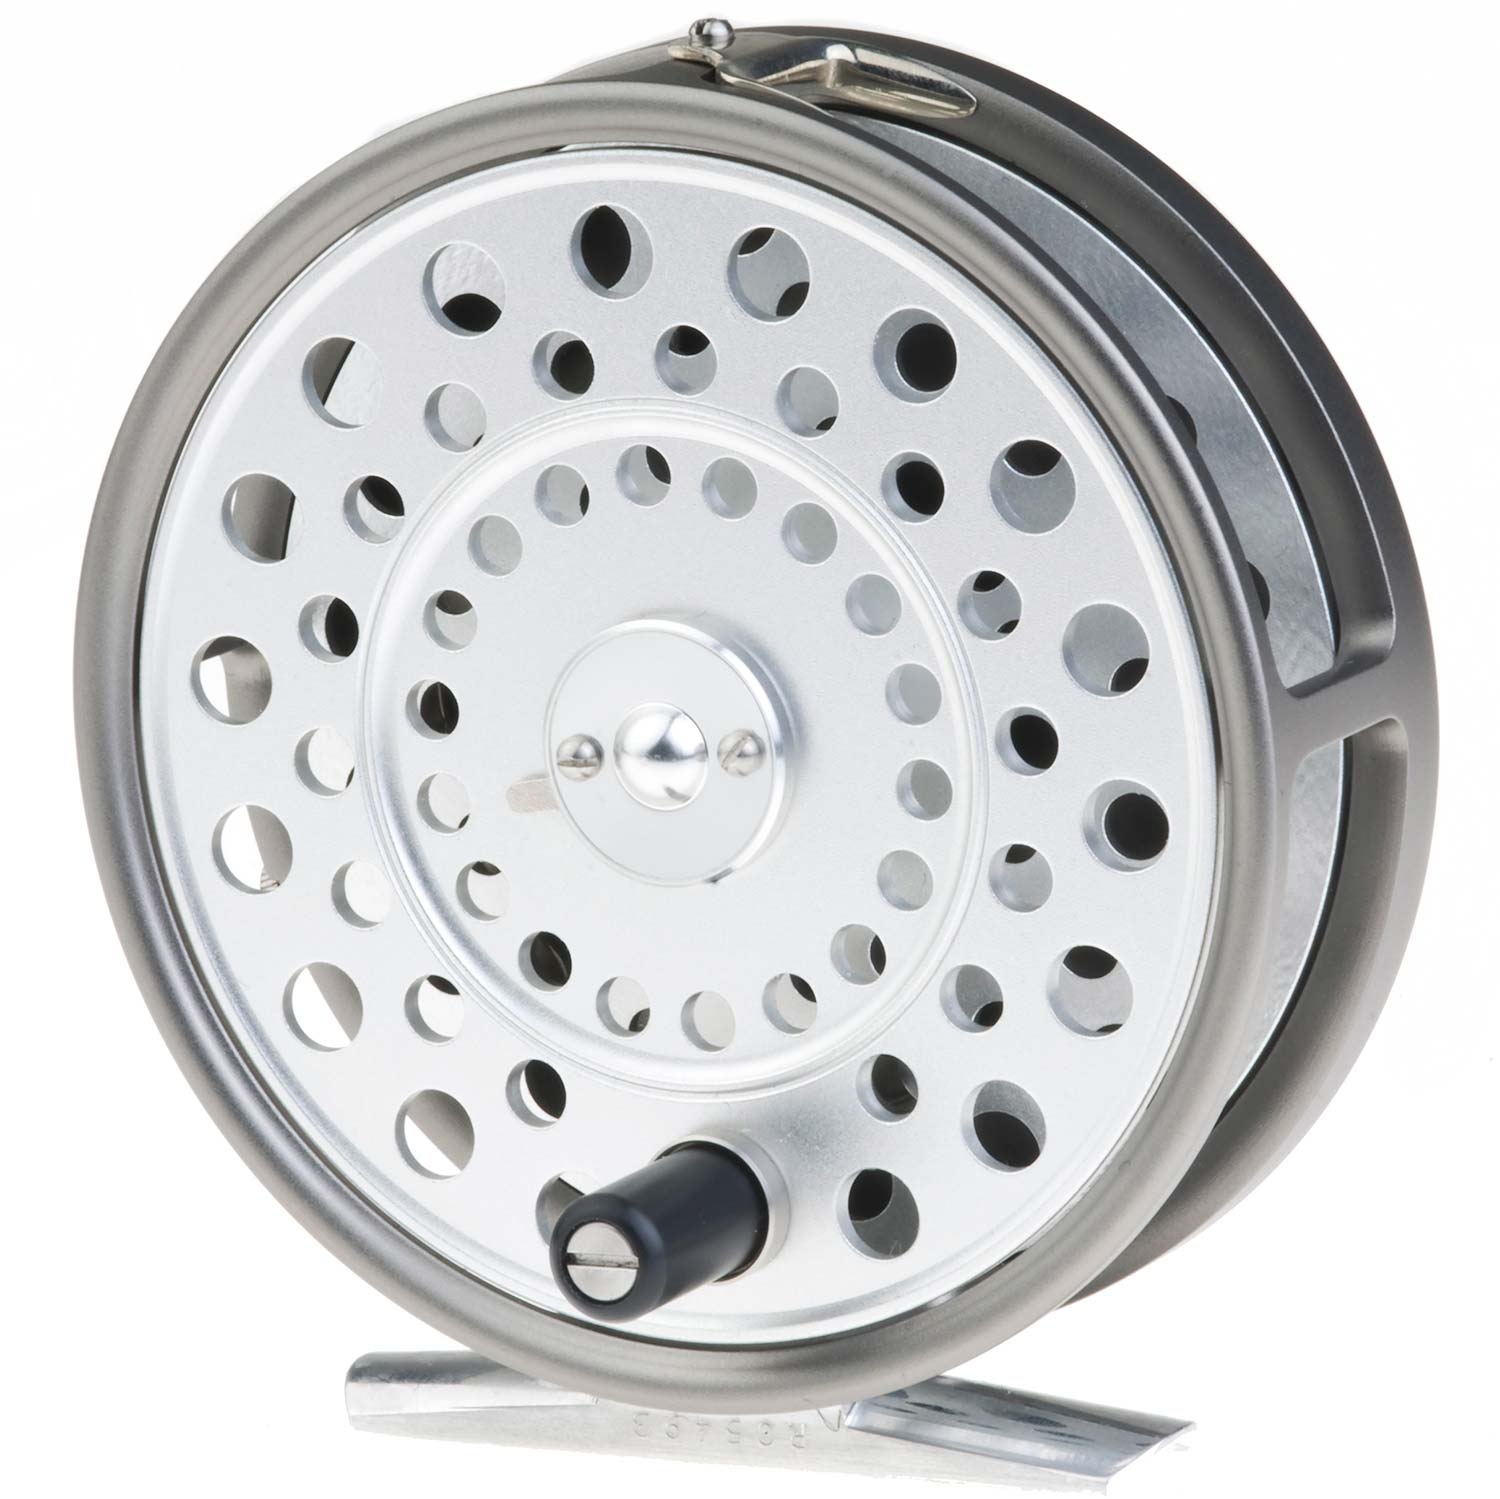 Hardy Lightweight Fly Reel - Low Weight Fly Fishing Reels at